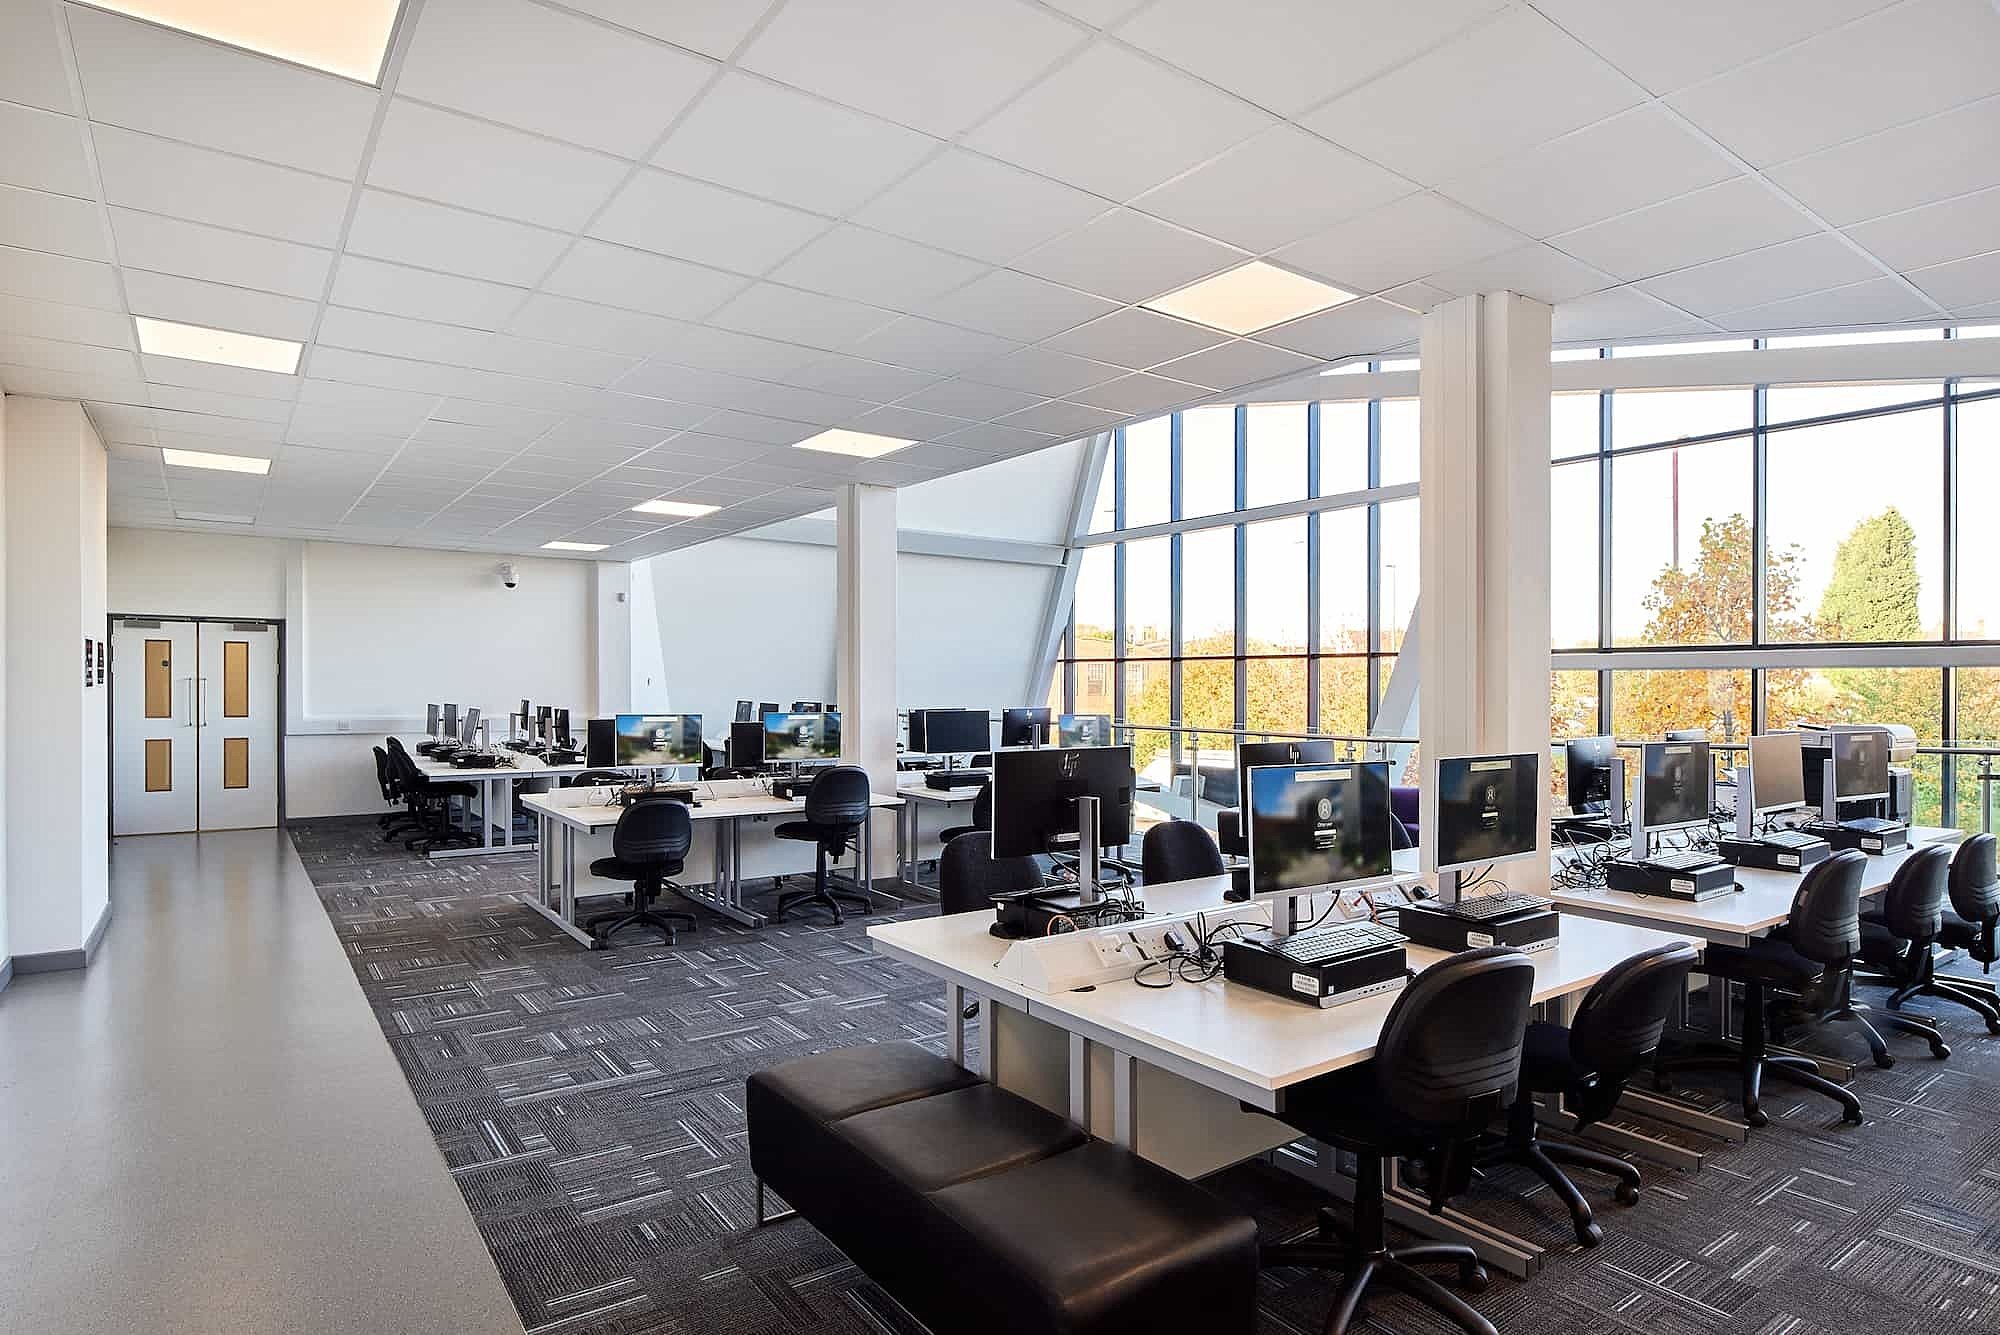 Dudley College refurbishment for wellbeing